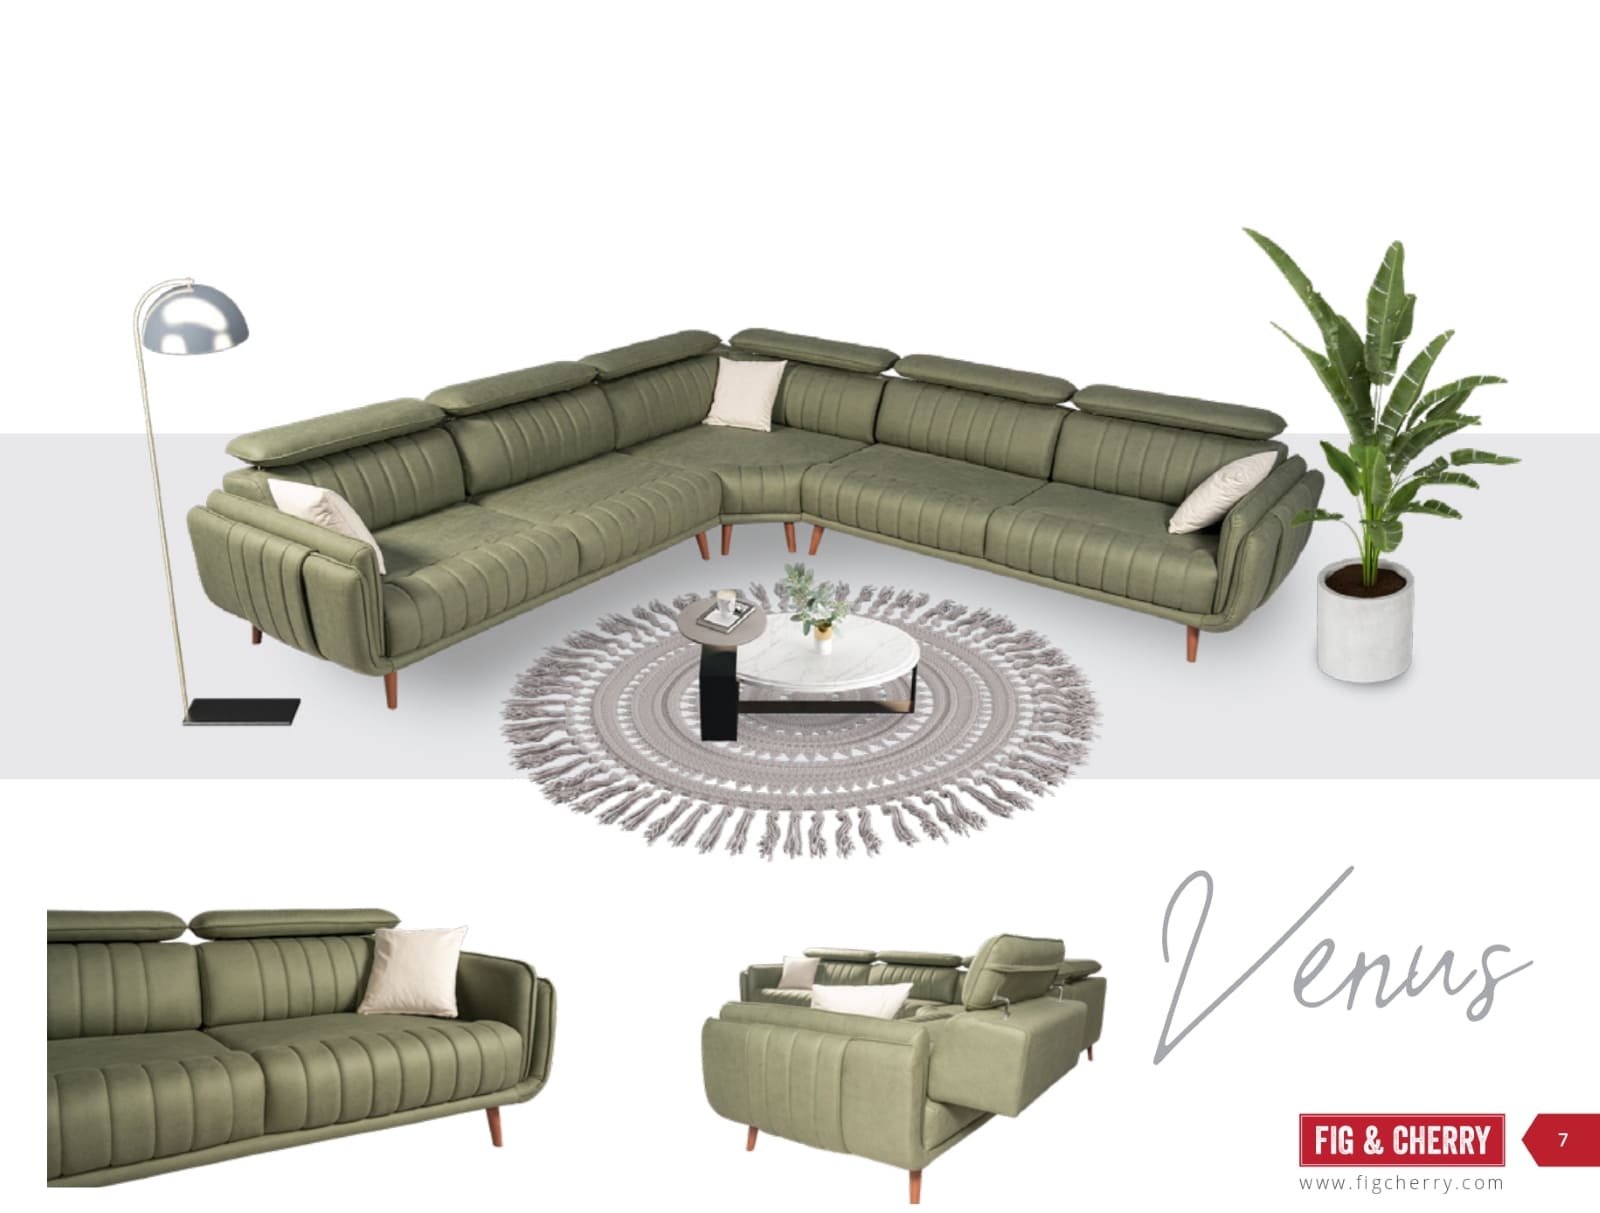 Fig & Cherry Indoor Collection (Sofas and Sectionals) Catalog (7)